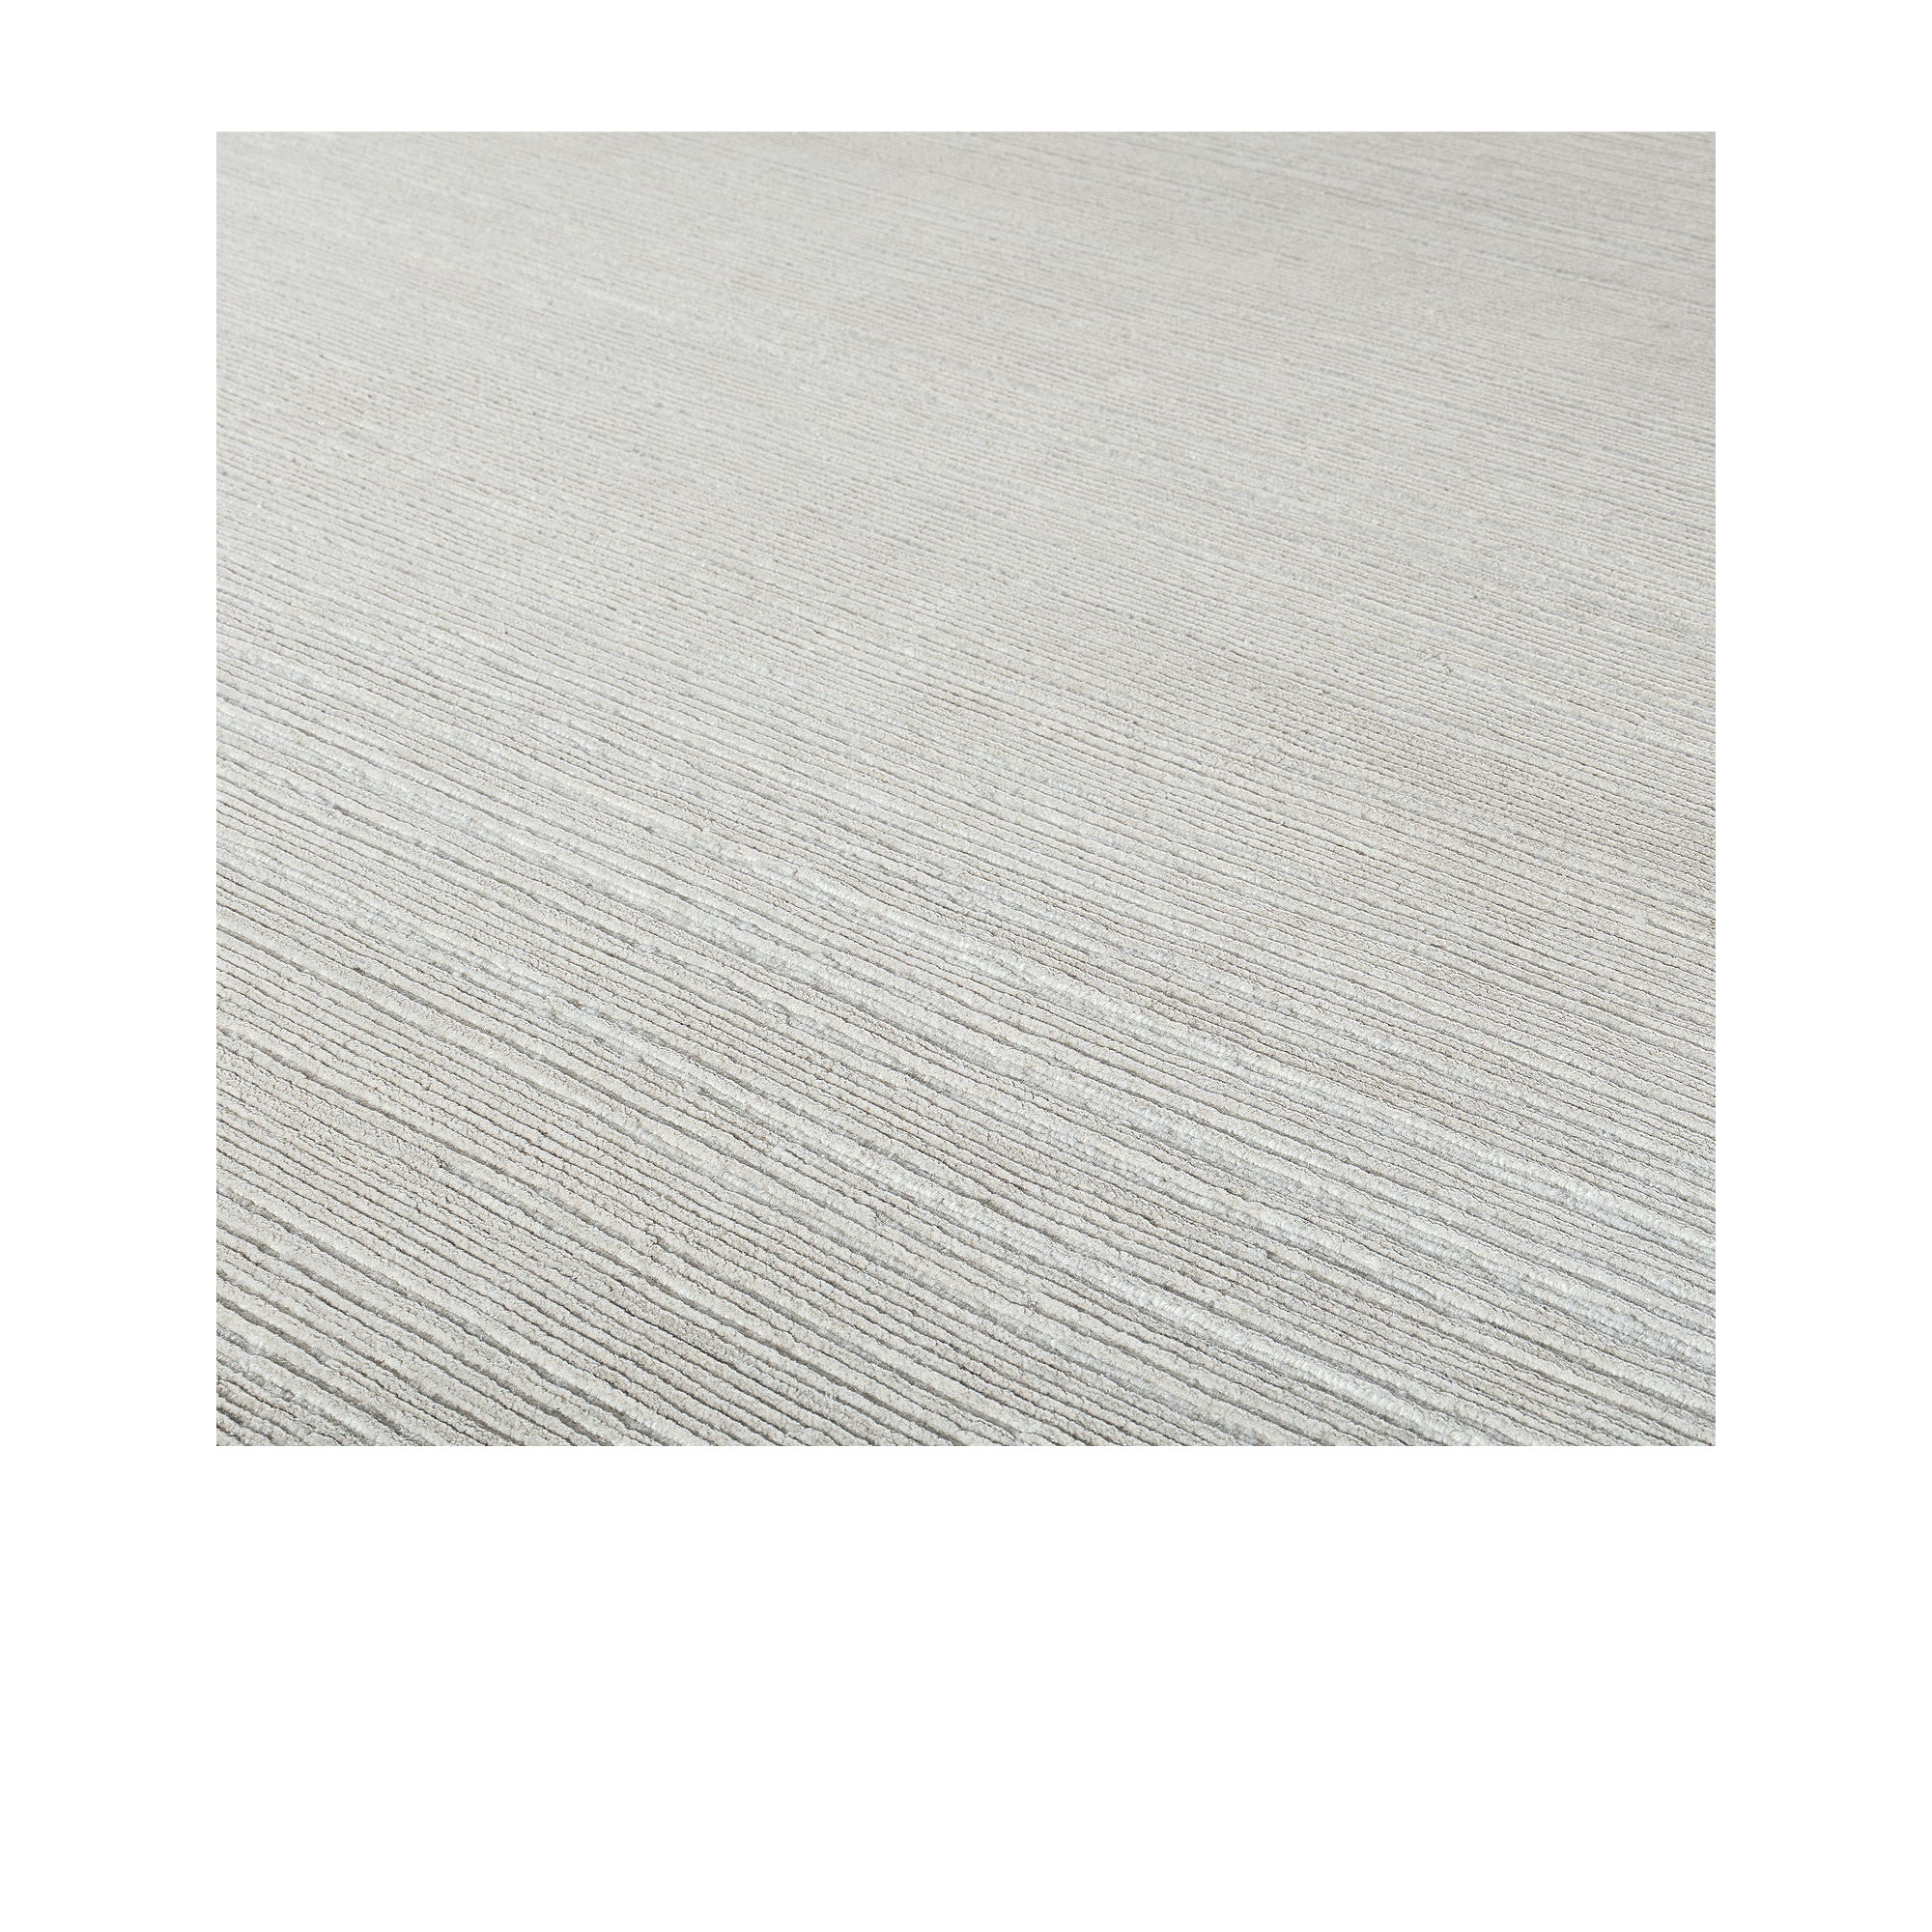 Our Staggered rug is hand-knotted in Nepal. using the finest hand-spun naturally dyed wool and silk.